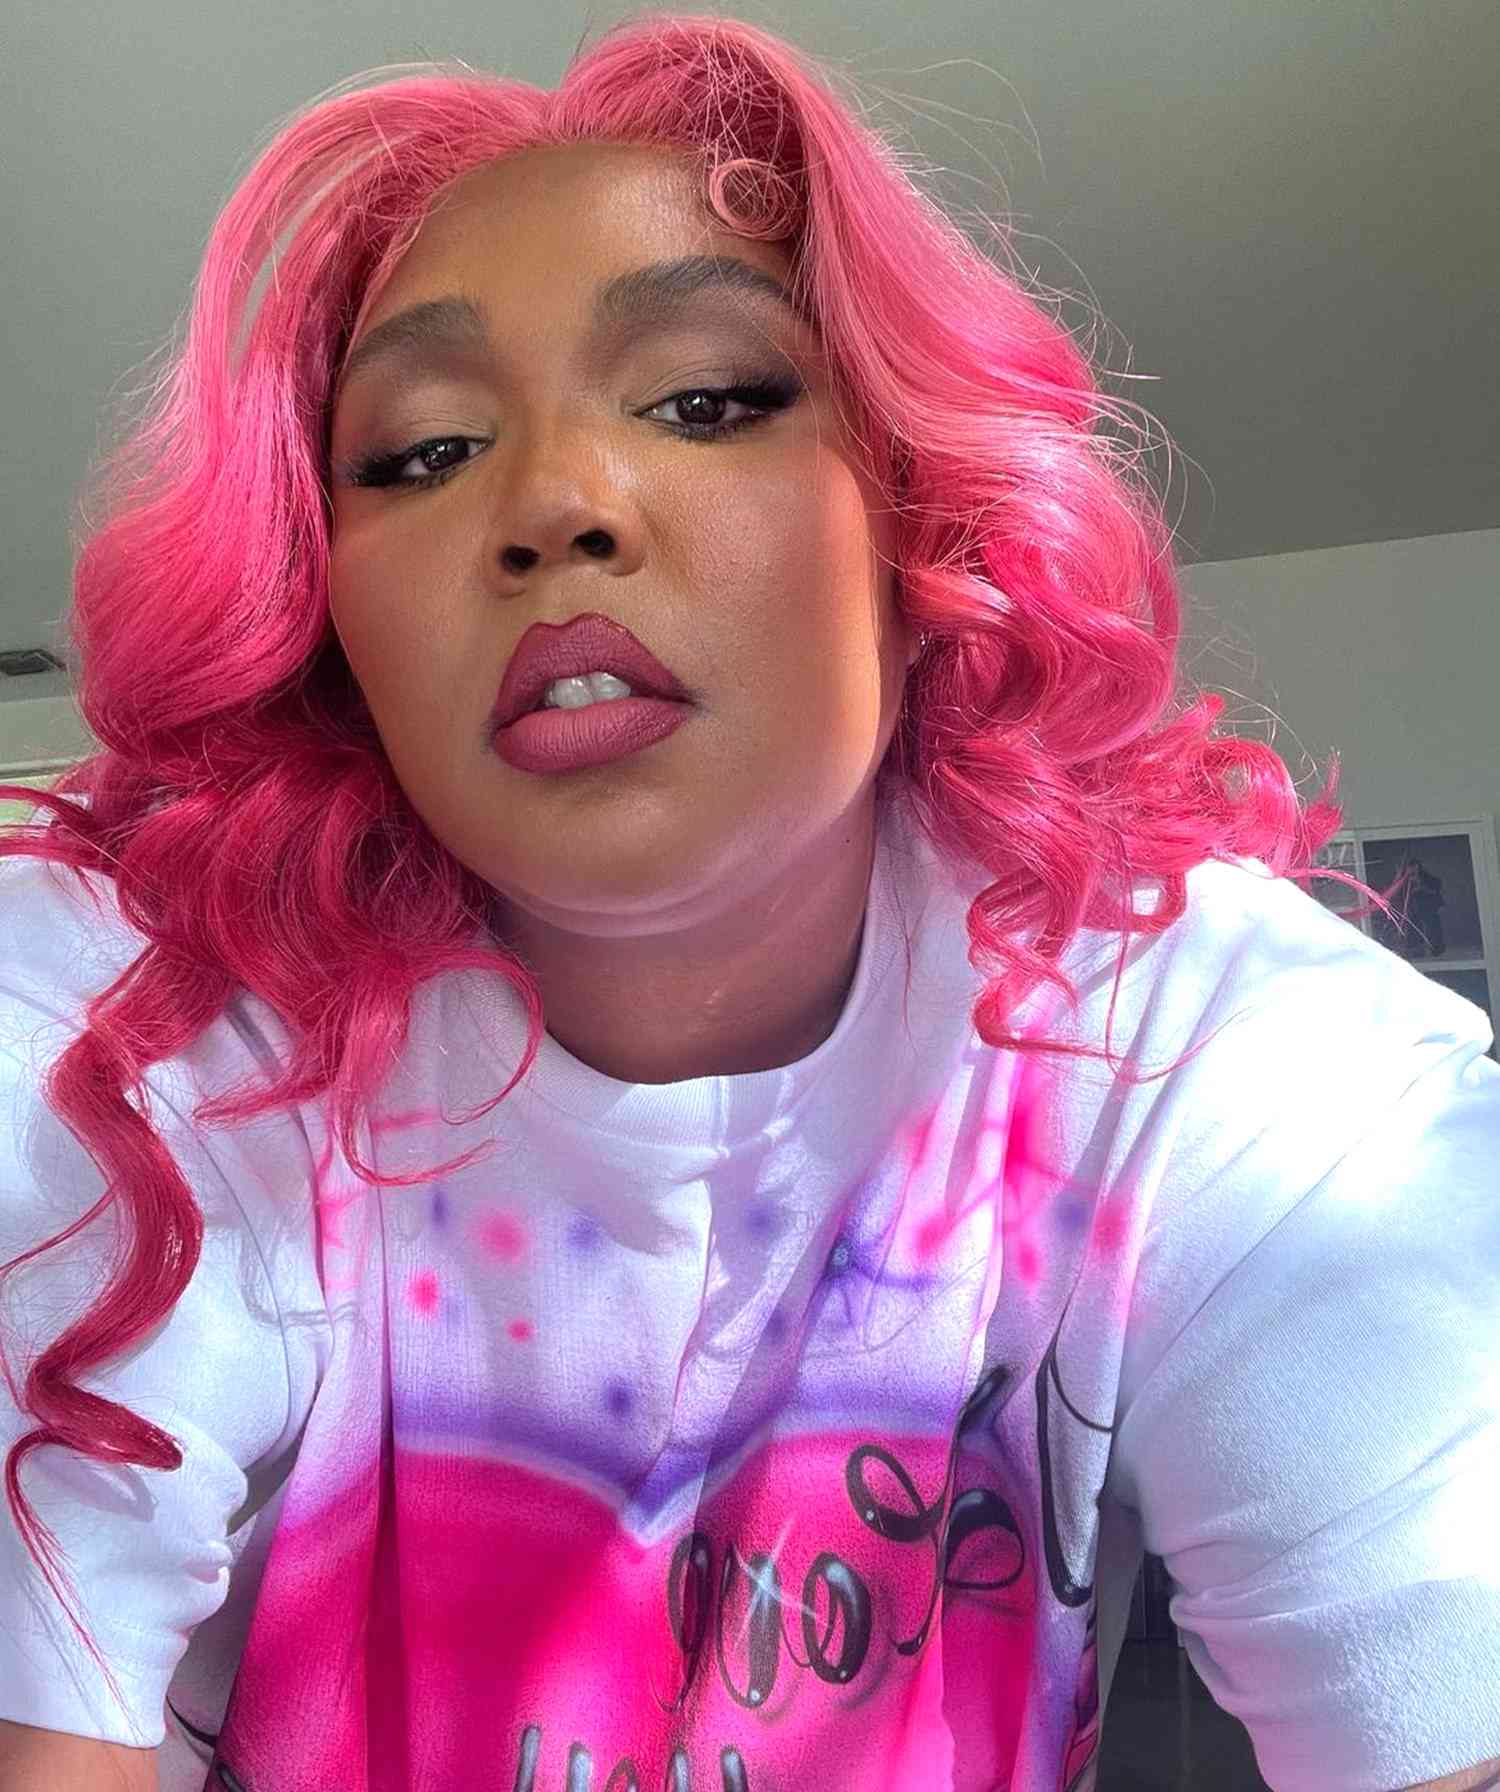 Lizzo Shows Off Fabulous New Hot-Pink Hair as She Dances to ‘GRRRLS’ on Instagram